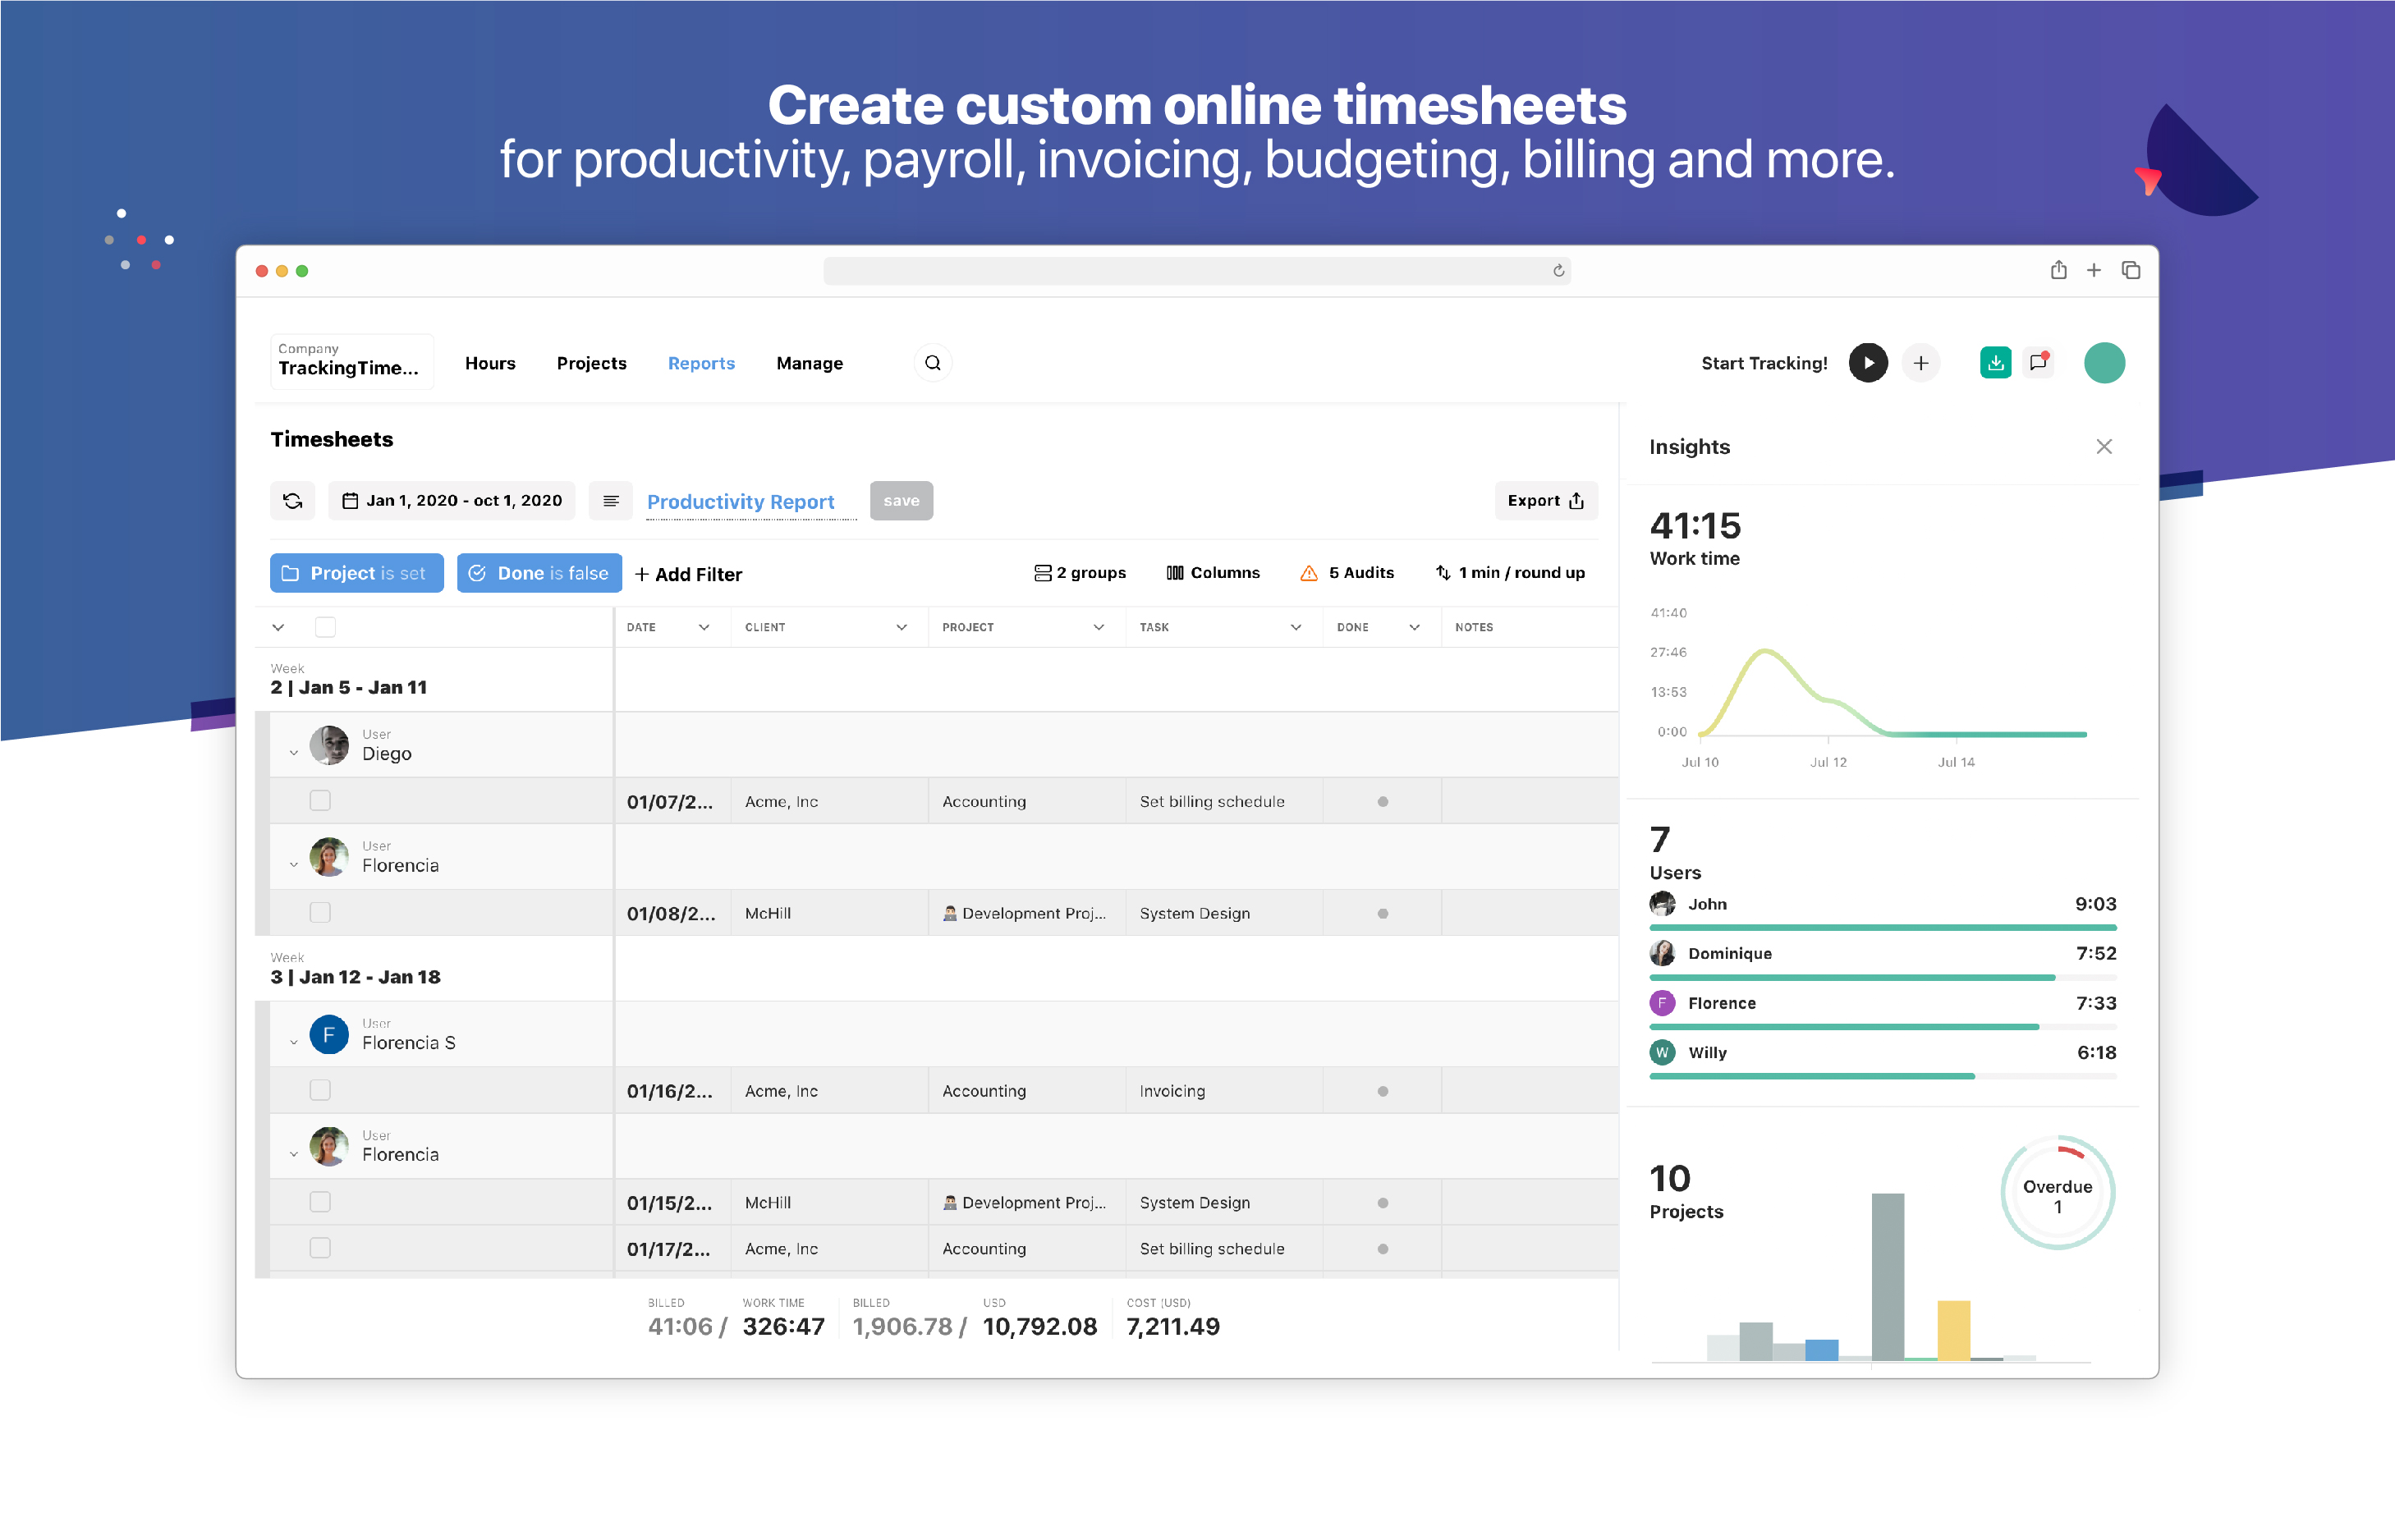 Create custom online timesheets for productivity, payroll, invoicing, budgeting, billing and more.